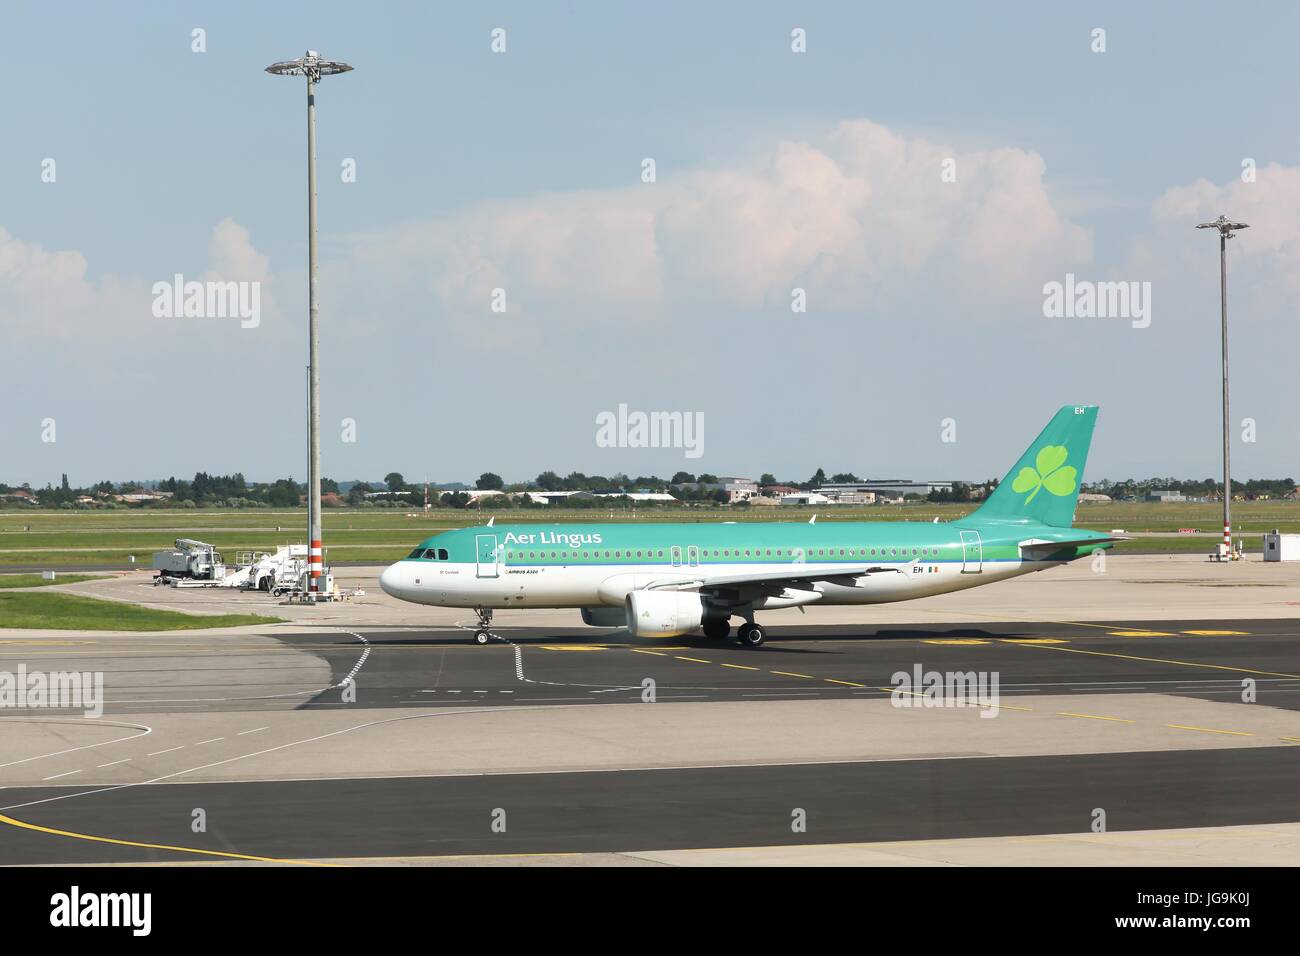 Lyon, France - May 27 2017: Aer Lingus airplane at Lyon airport. Aer Lingus is the flag carrier airline of Ireland Stock Photo